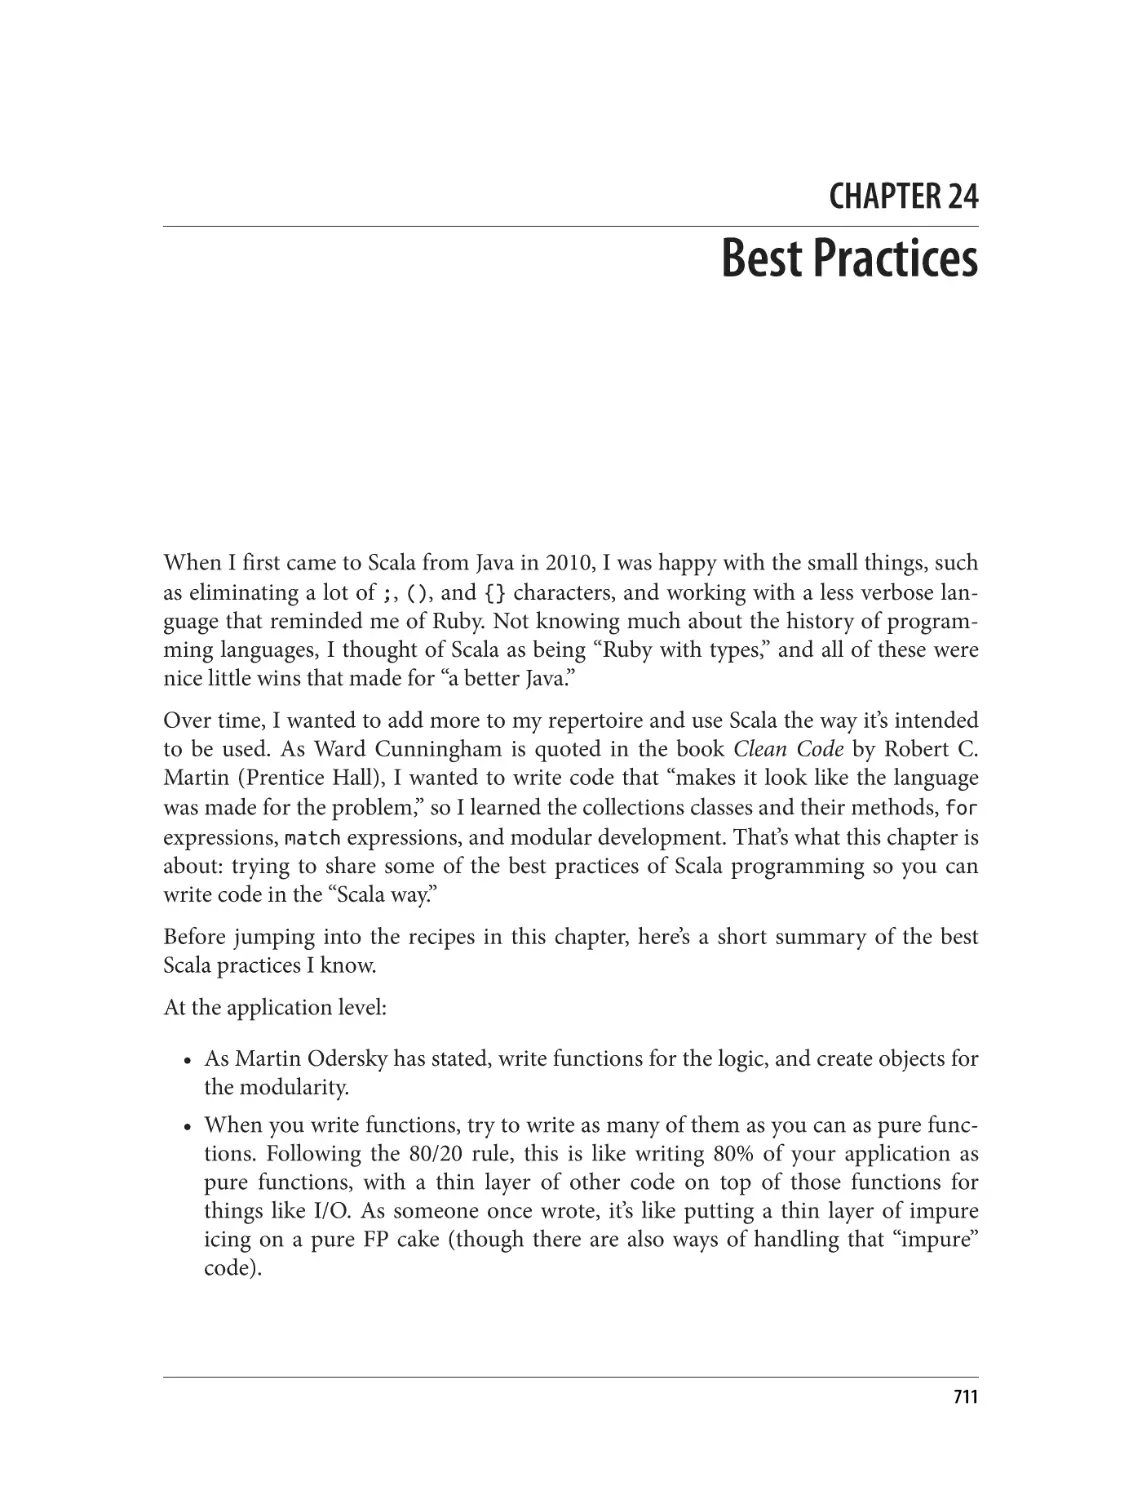 Chapter 24. Best Practices